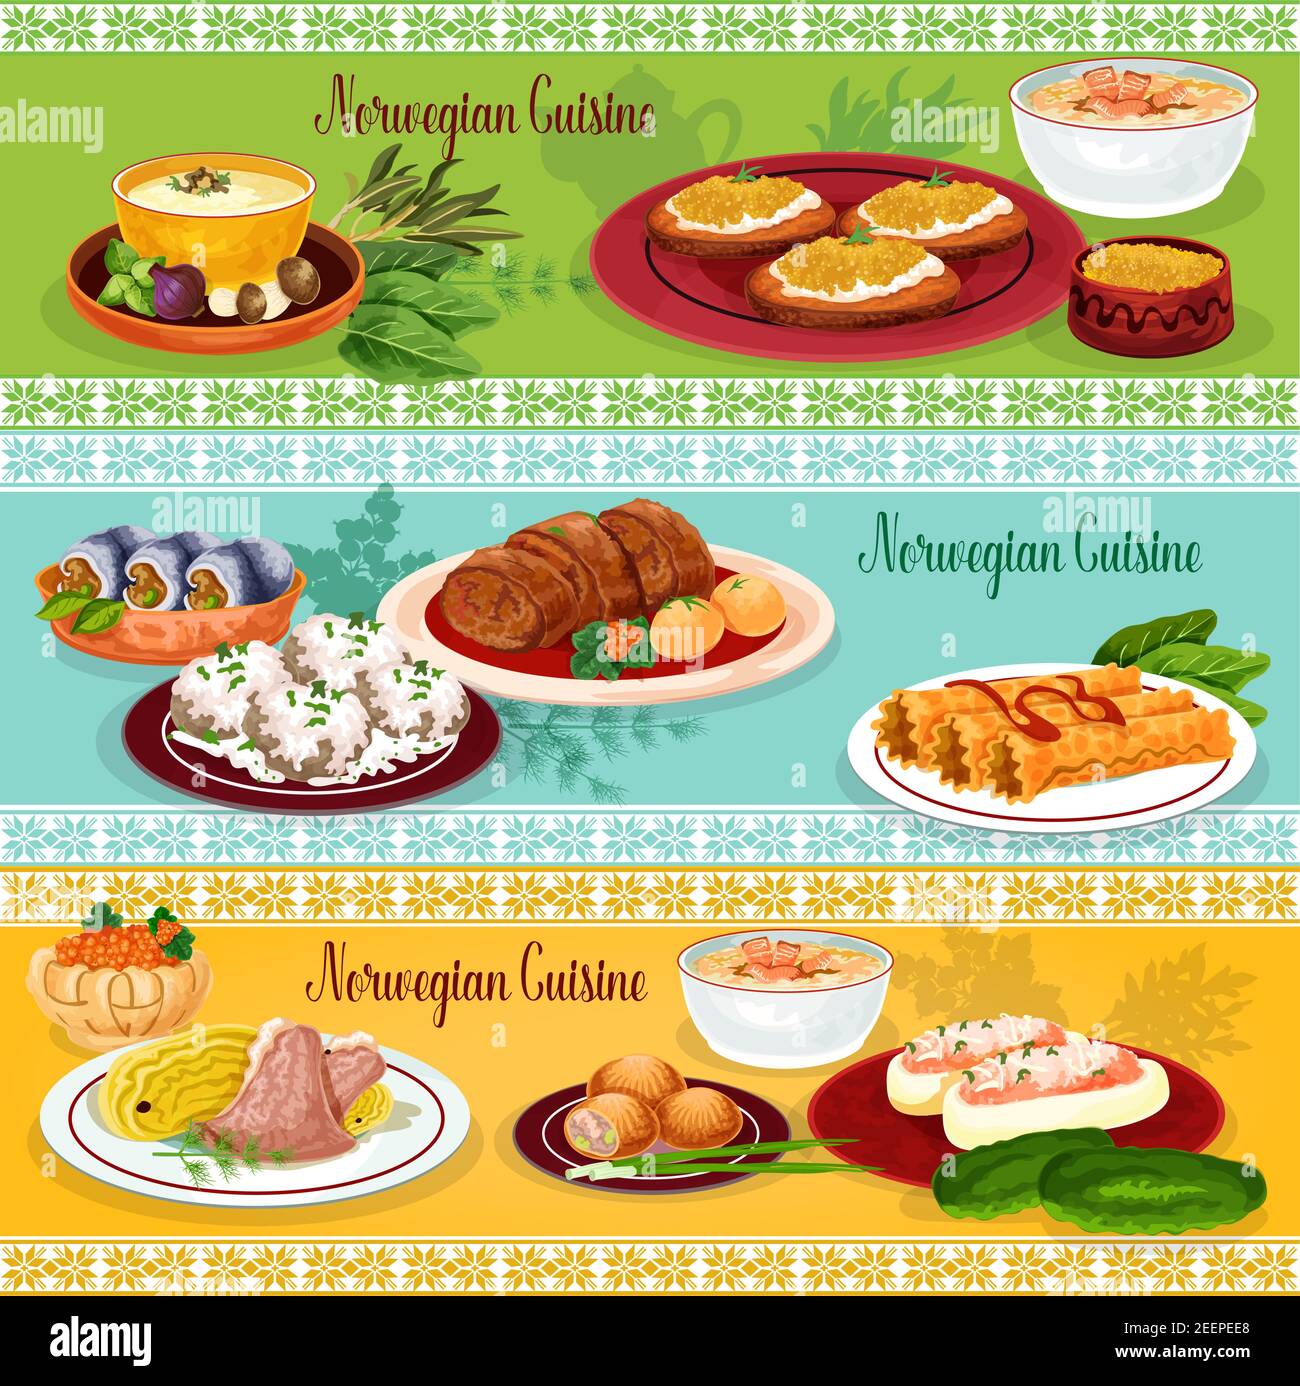 Norwegian cuisine seafood lunch restaurant banner set. Fish and mushroom cream soup, salmon potato pie, meat cabbage stew, herring roll, pike roe toas Stock Vector